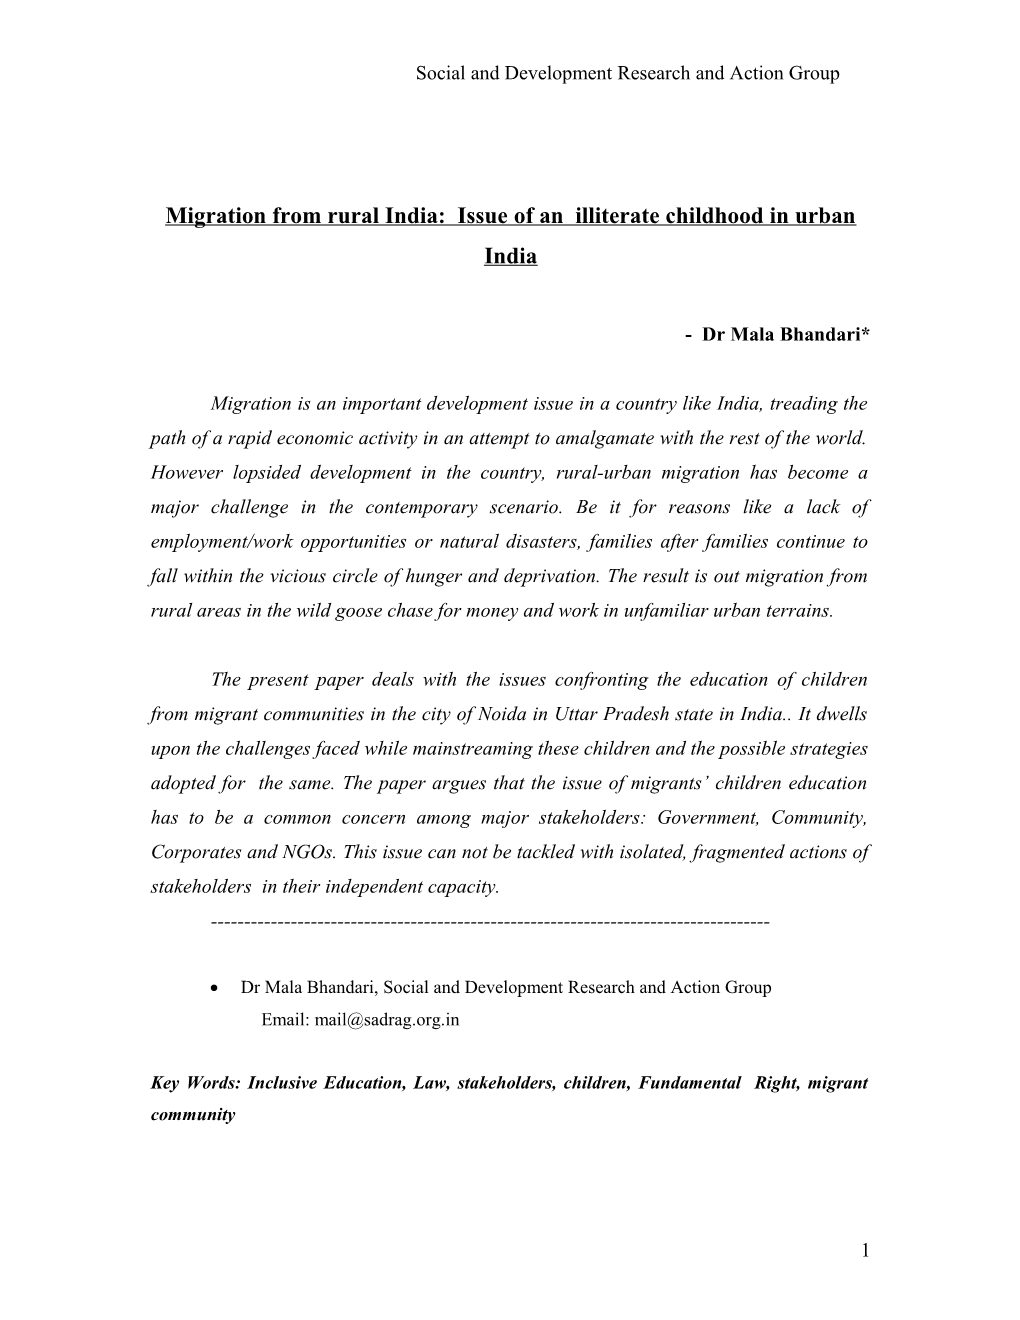 Migration from Rural India: Issue of an Illiterate Childhood in Urban India